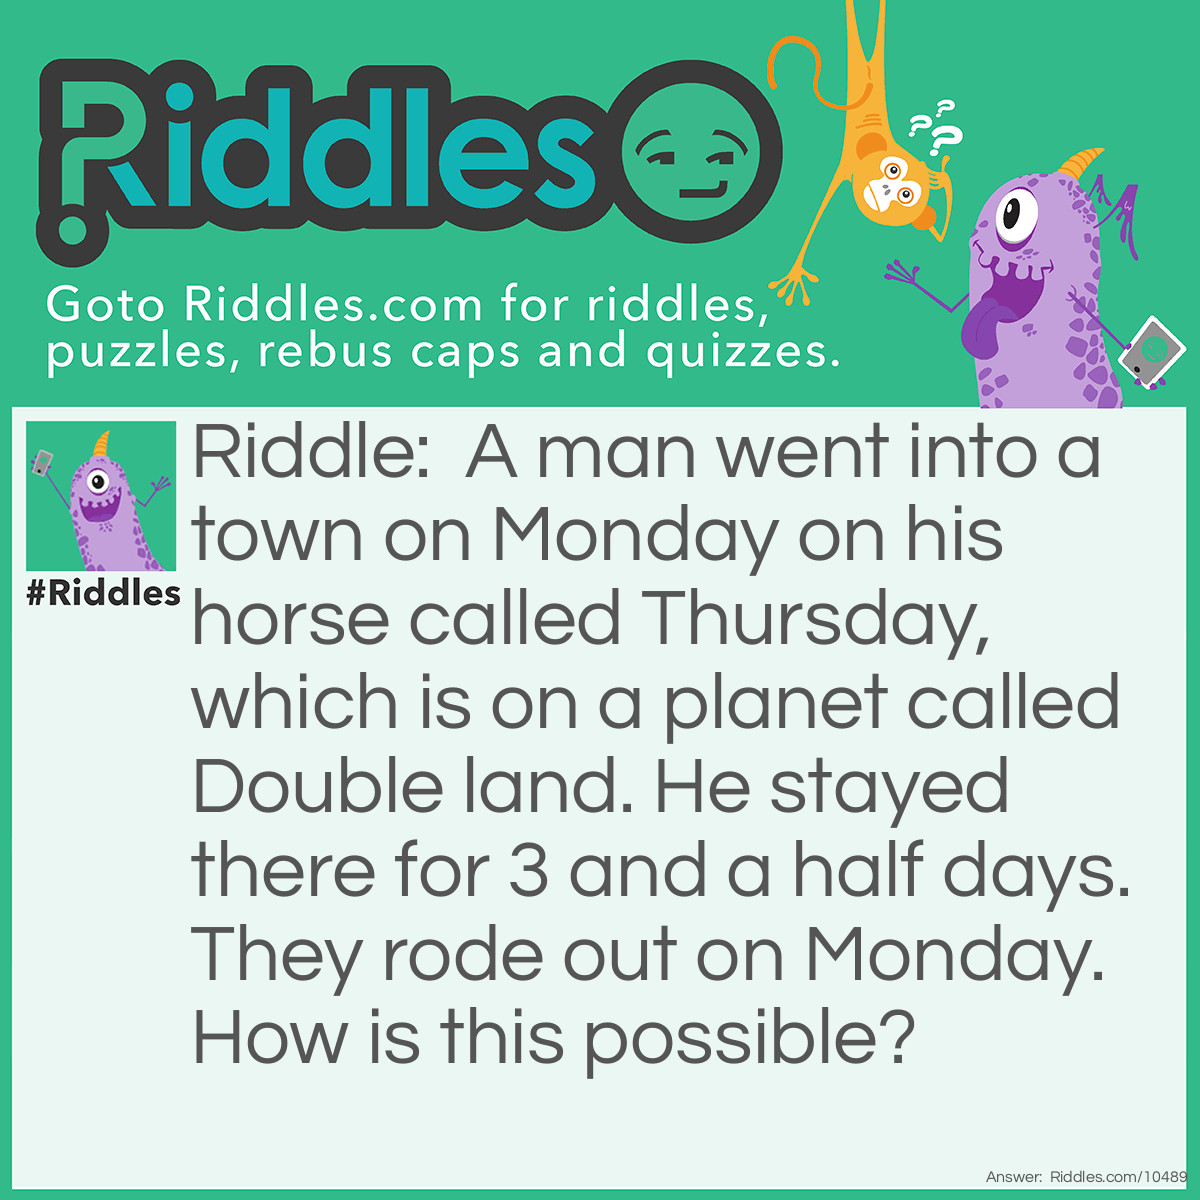 Riddle: A man went into a town on Monday on his horse called Thursday, which is on a planet called Double land. He stayed there for 3 and a half days.They rode out on Monday. How is this possible? Answer: Because it is Double land, 3 and a half days are doubled and become a week. Therefore, the man rides out one week later.